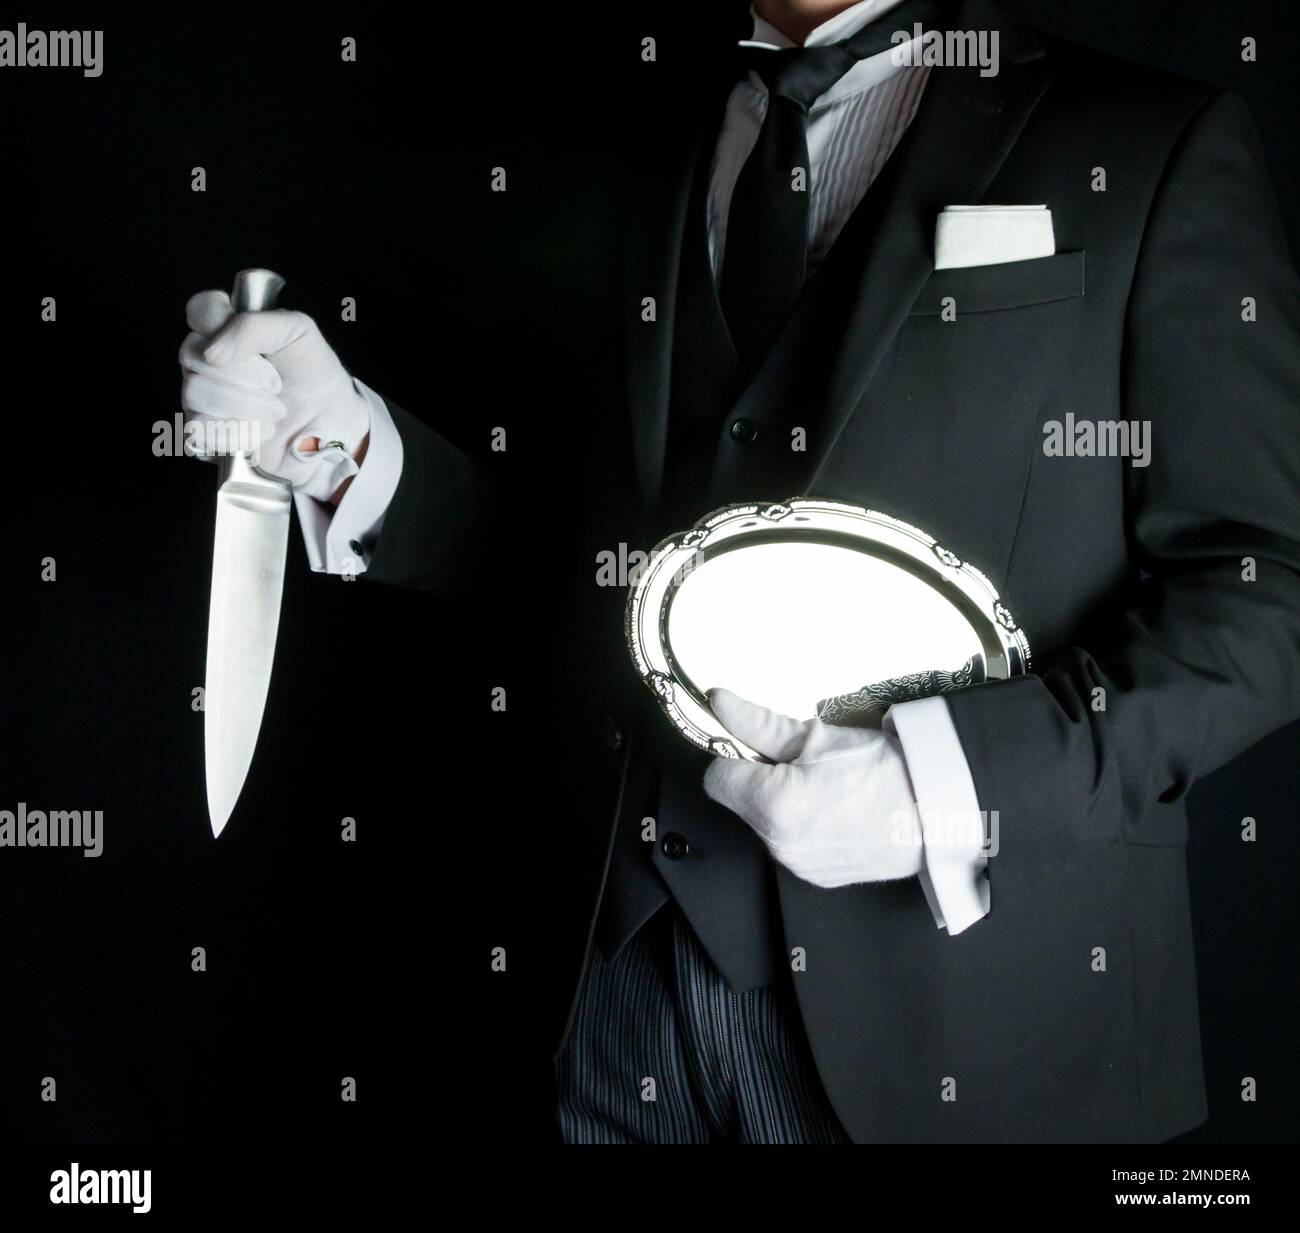 Butler in Dark Suit Holding Silver Serving Tray and a Sharp Knife. Concept of Butler Did It Classic Murder Mystery Stock Photo